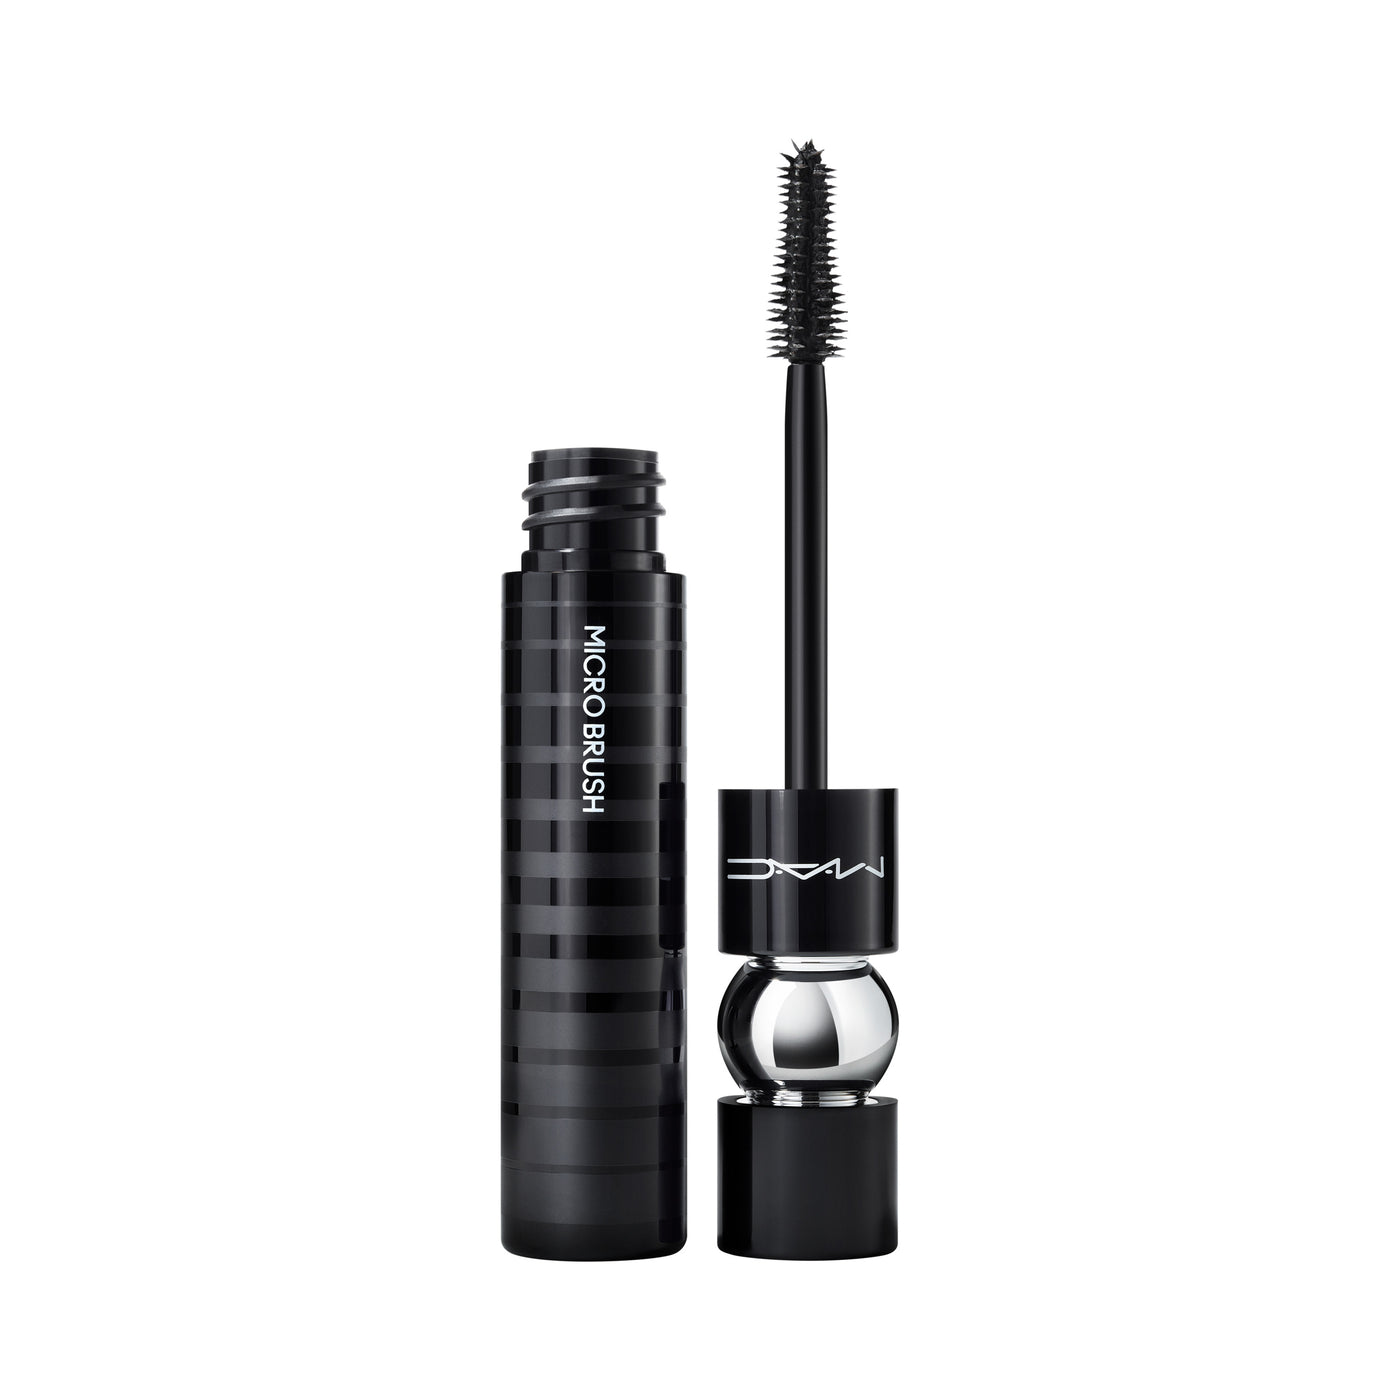 Shop The Latest Collection Of Mâ·Aâ·C Mâ·Aâ·C Stack Mascara In Lebanon